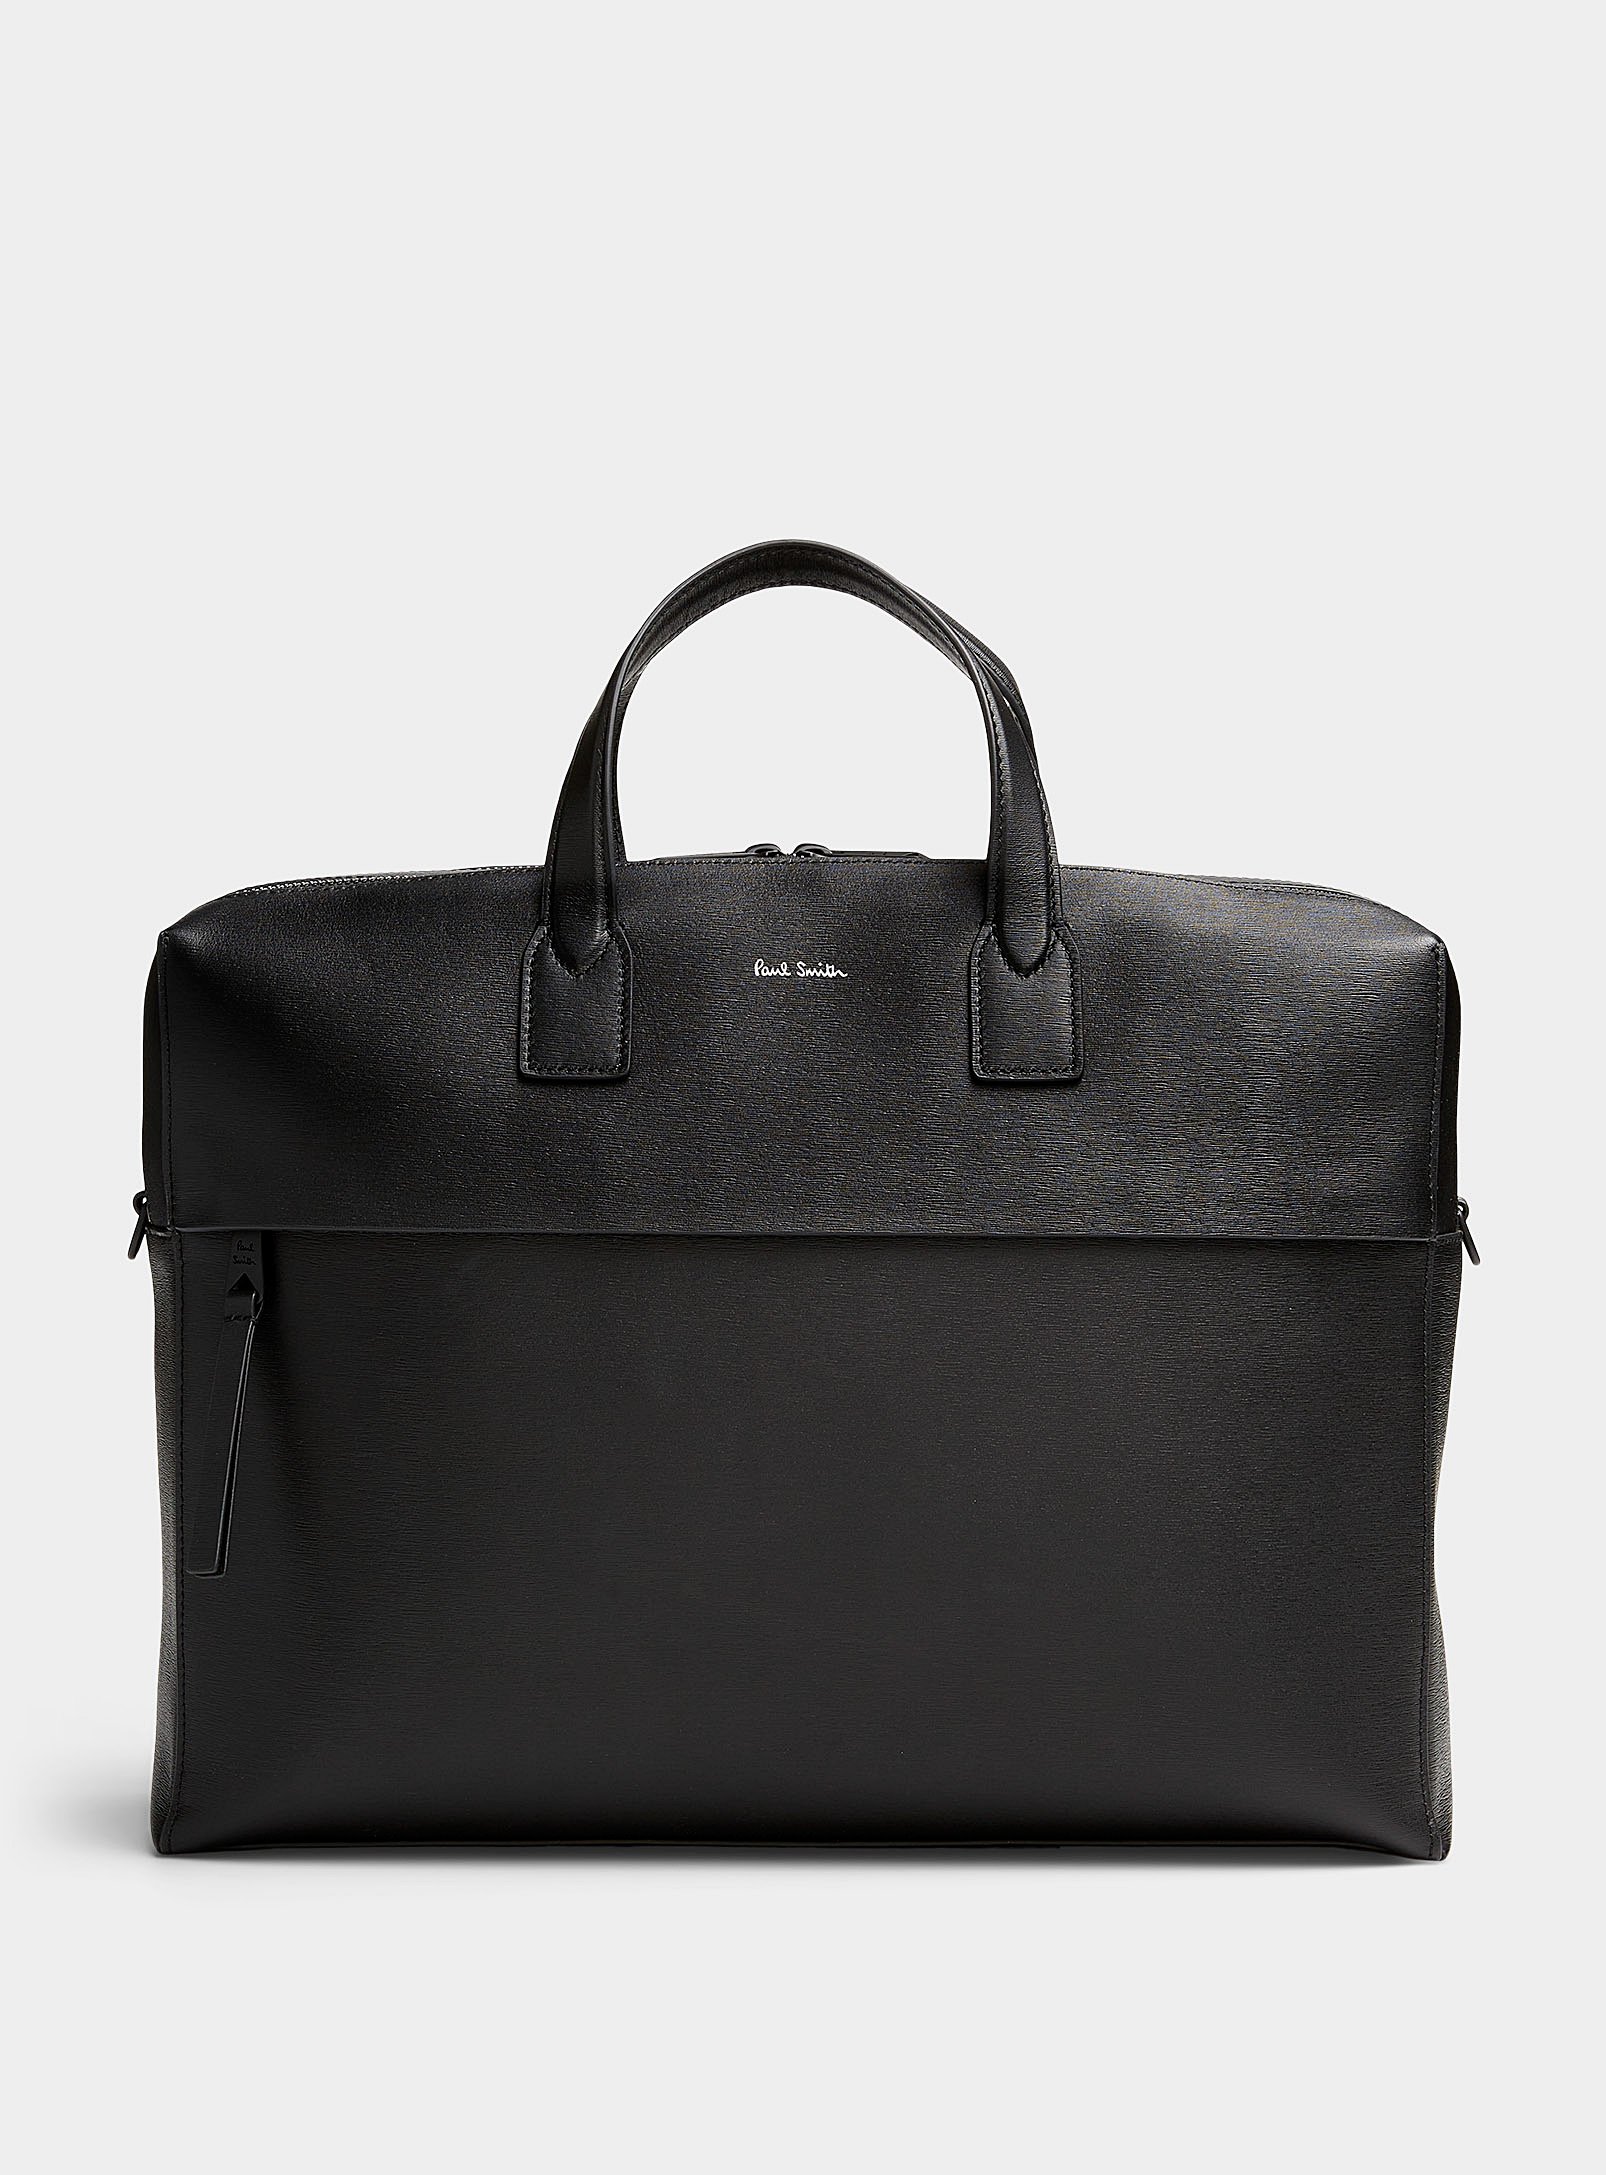 Paul Smith - Men's Double compartment leather briefcase